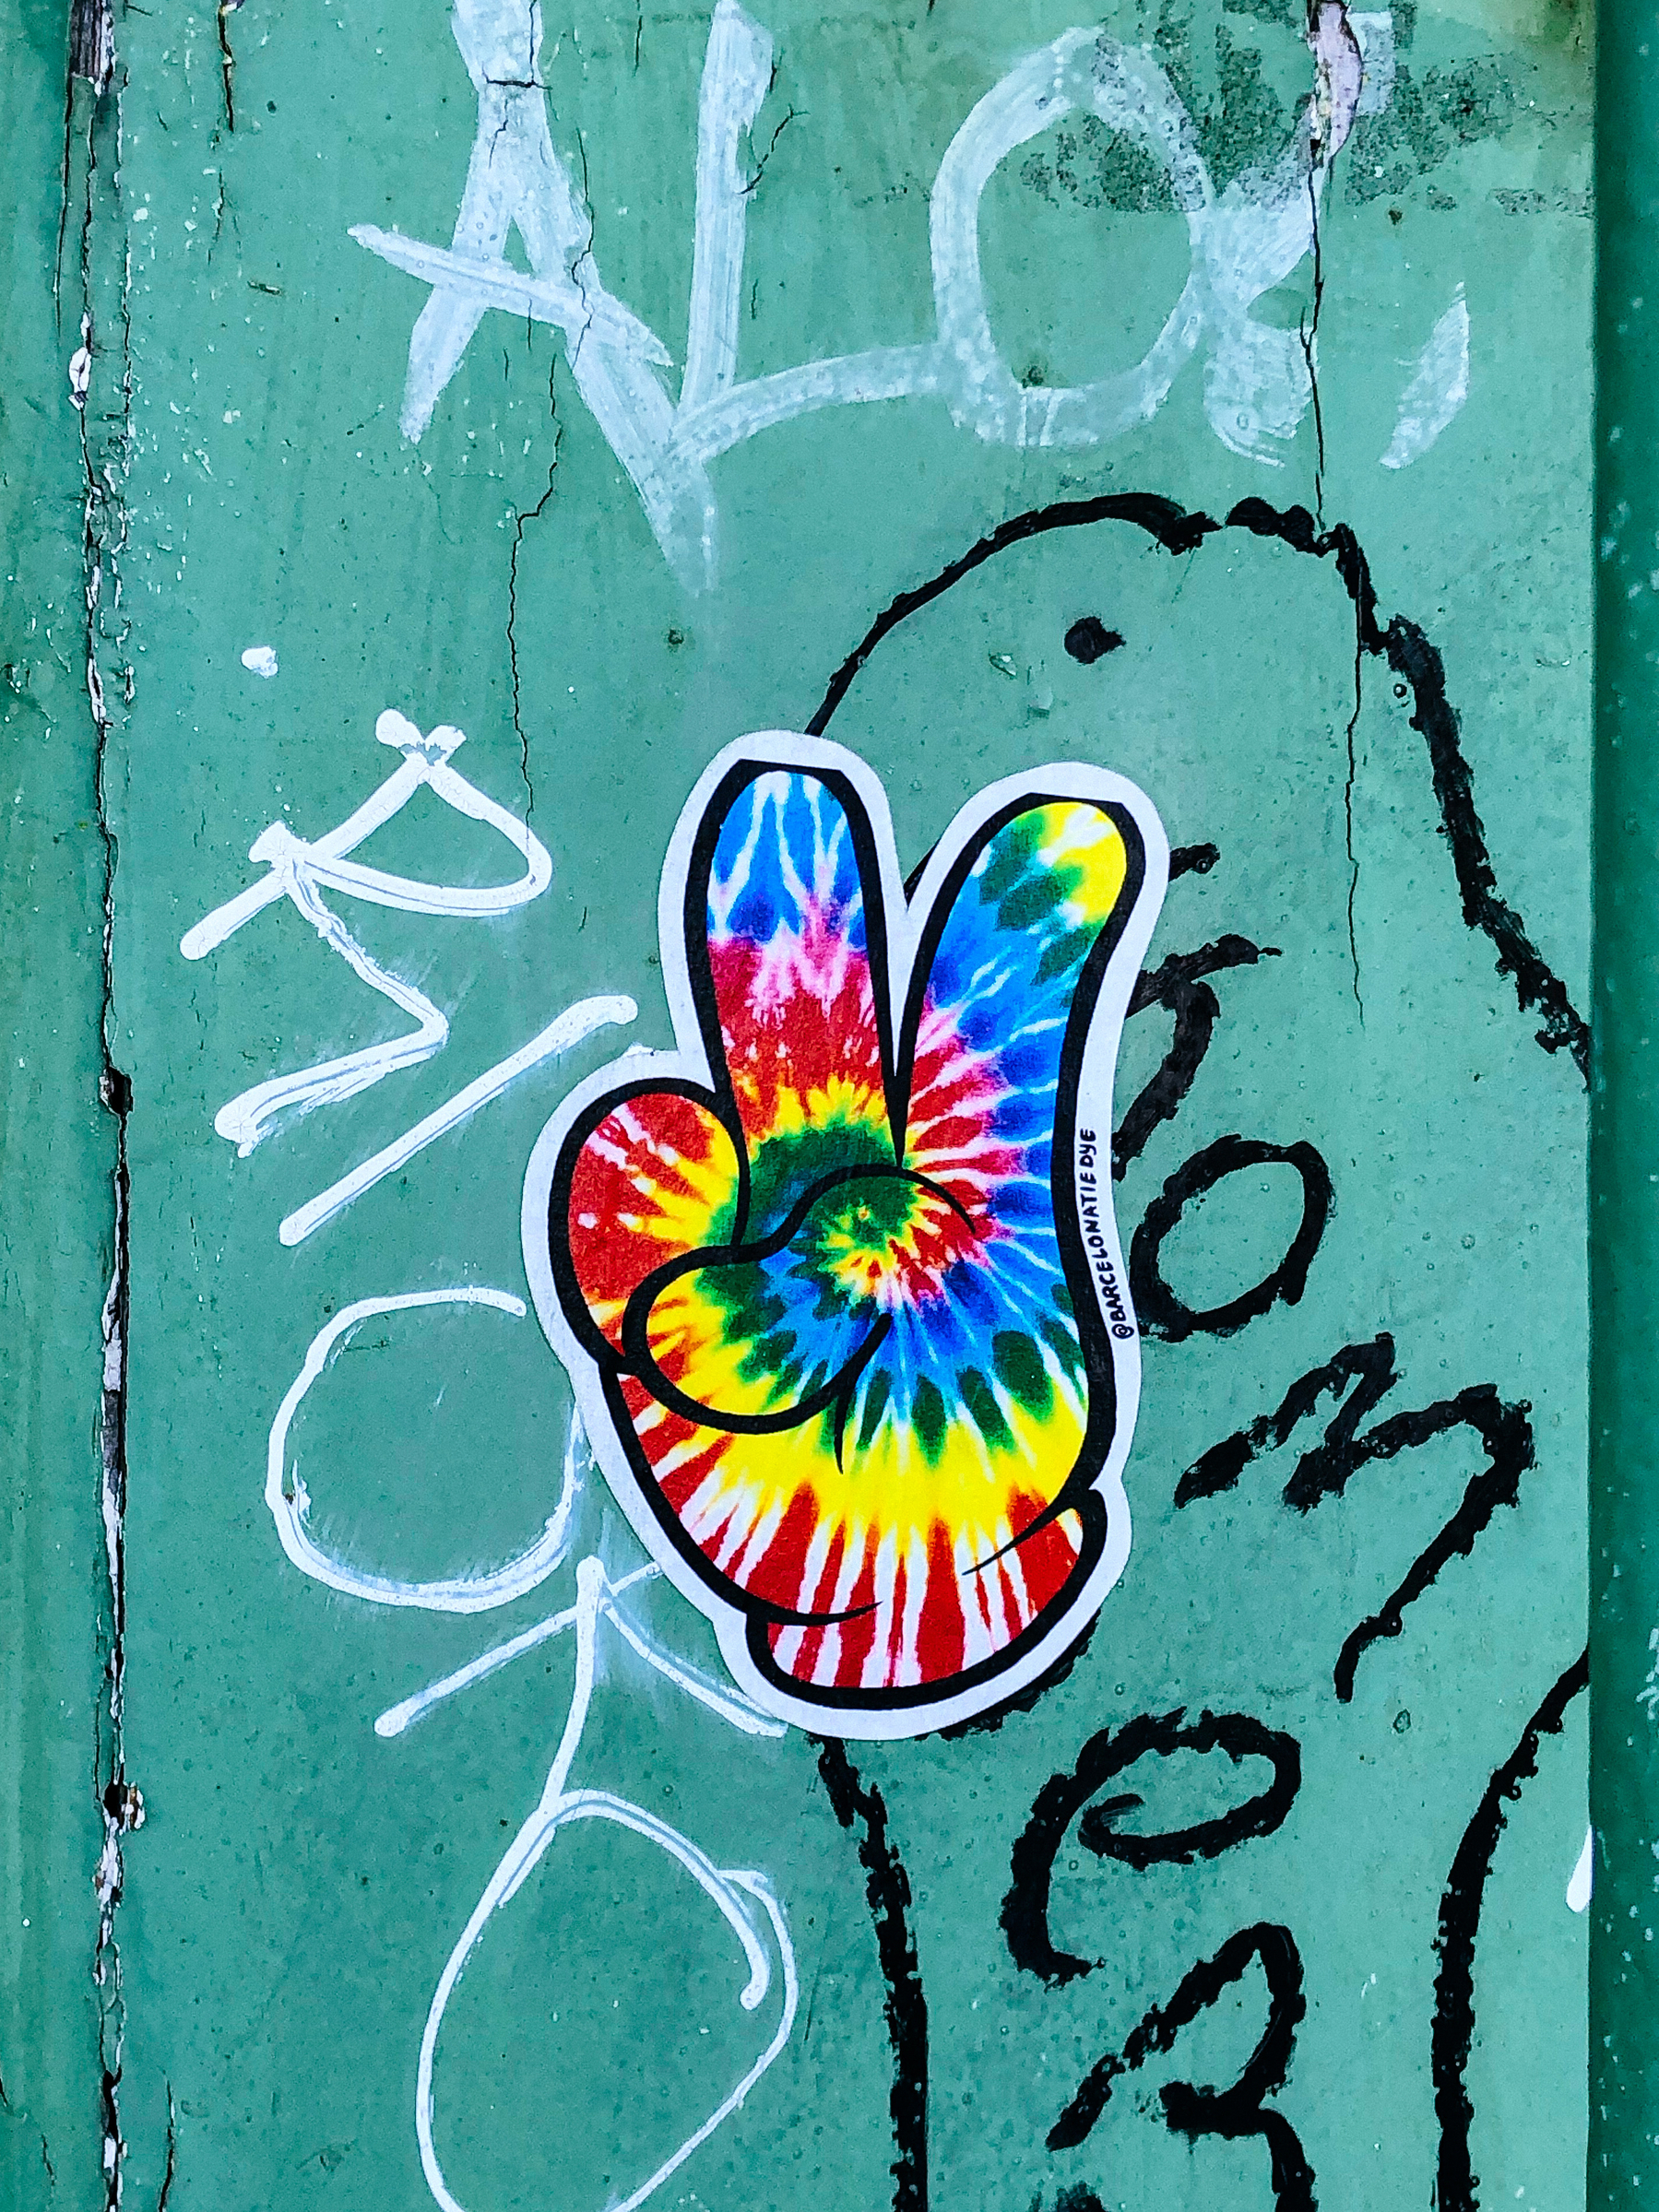 Sticker of a tie-dye cartoon hand doing the V sign. 